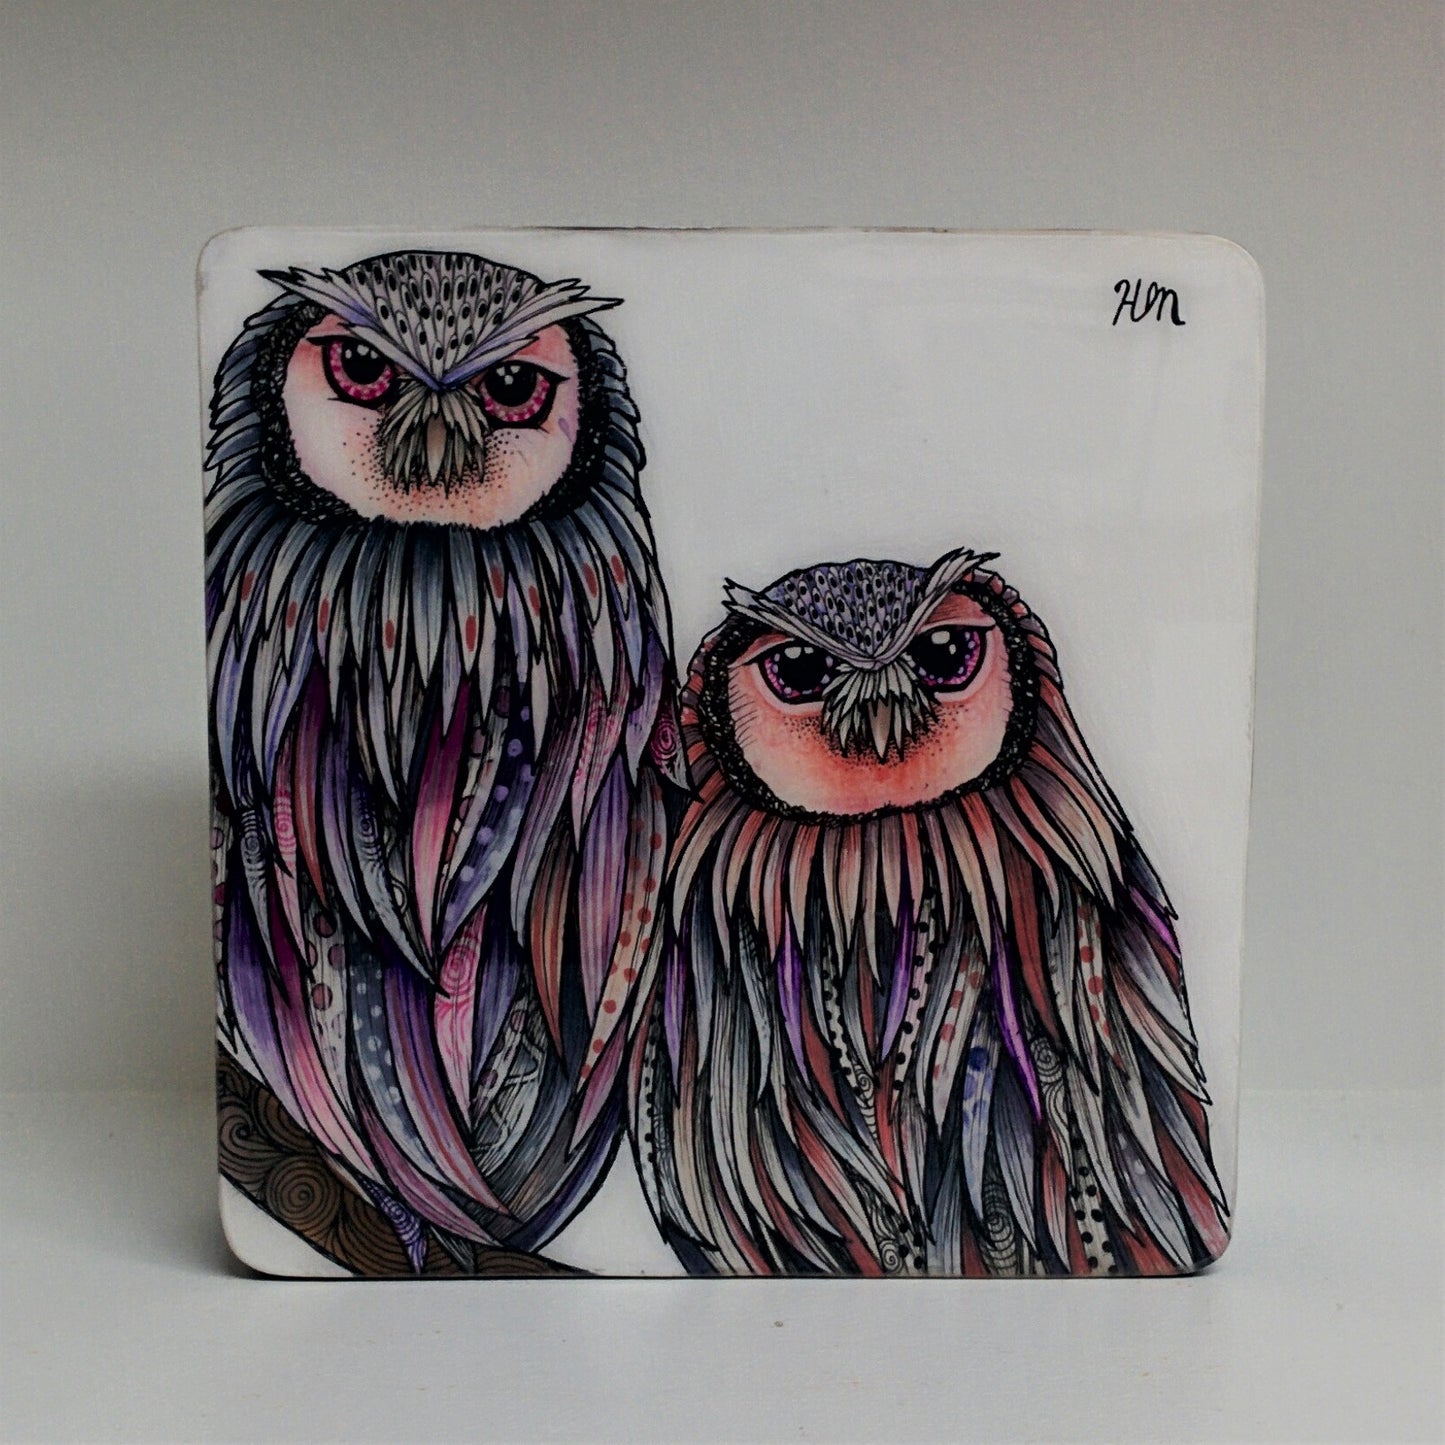 Original drawing and painting of a pair of owls by Canadian artist Hanna Mark